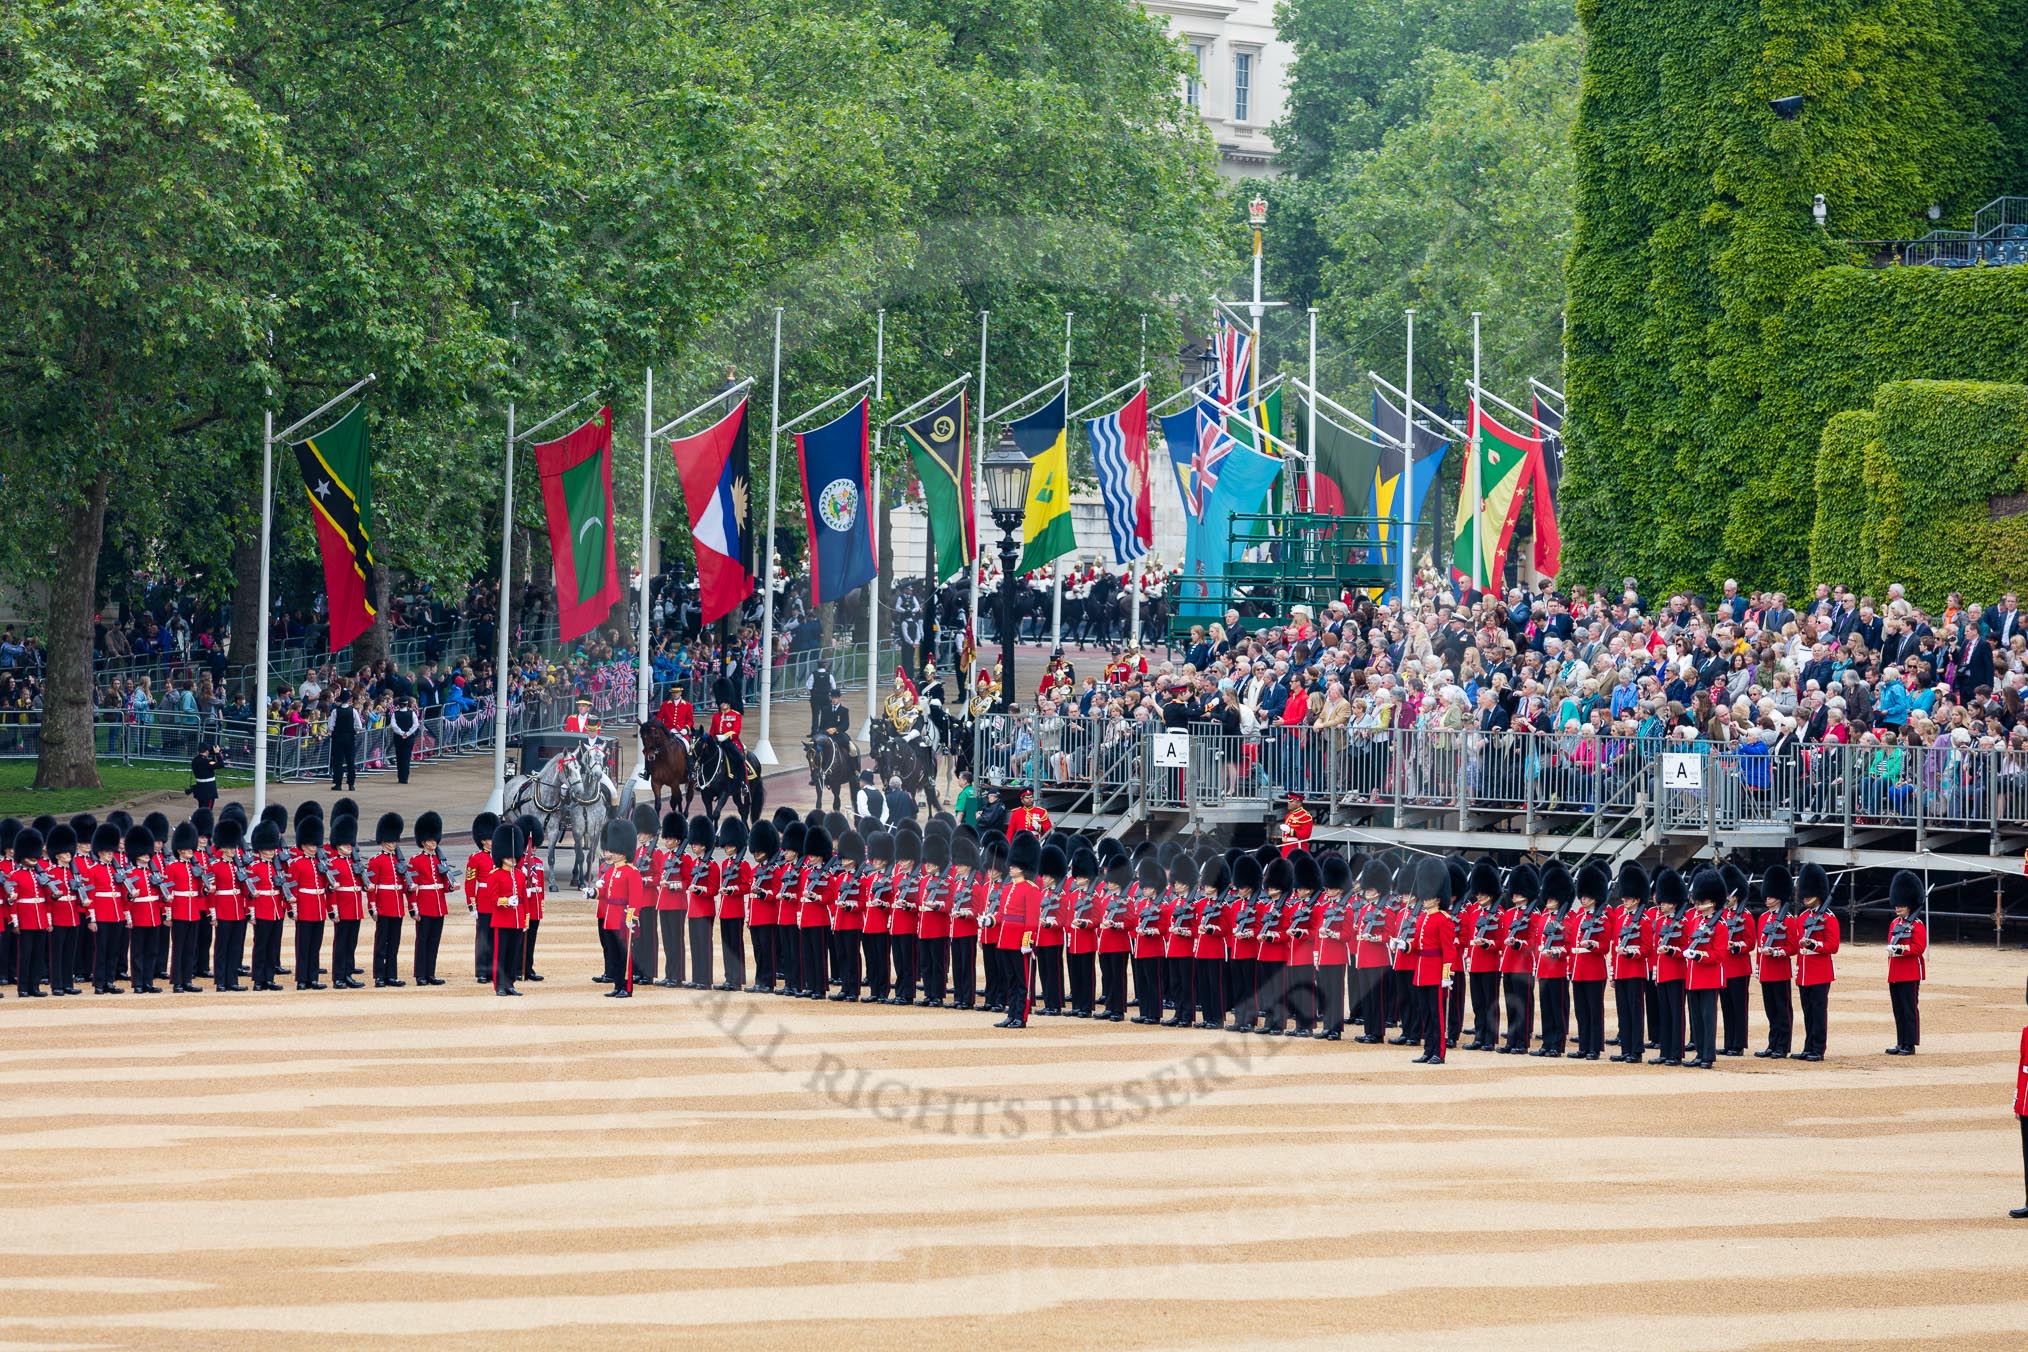 The Colonel's Review 2016.
Horse Guards Parade, Westminster,
London,

United Kingdom,
on 04 June 2016 at 10:58, image #153